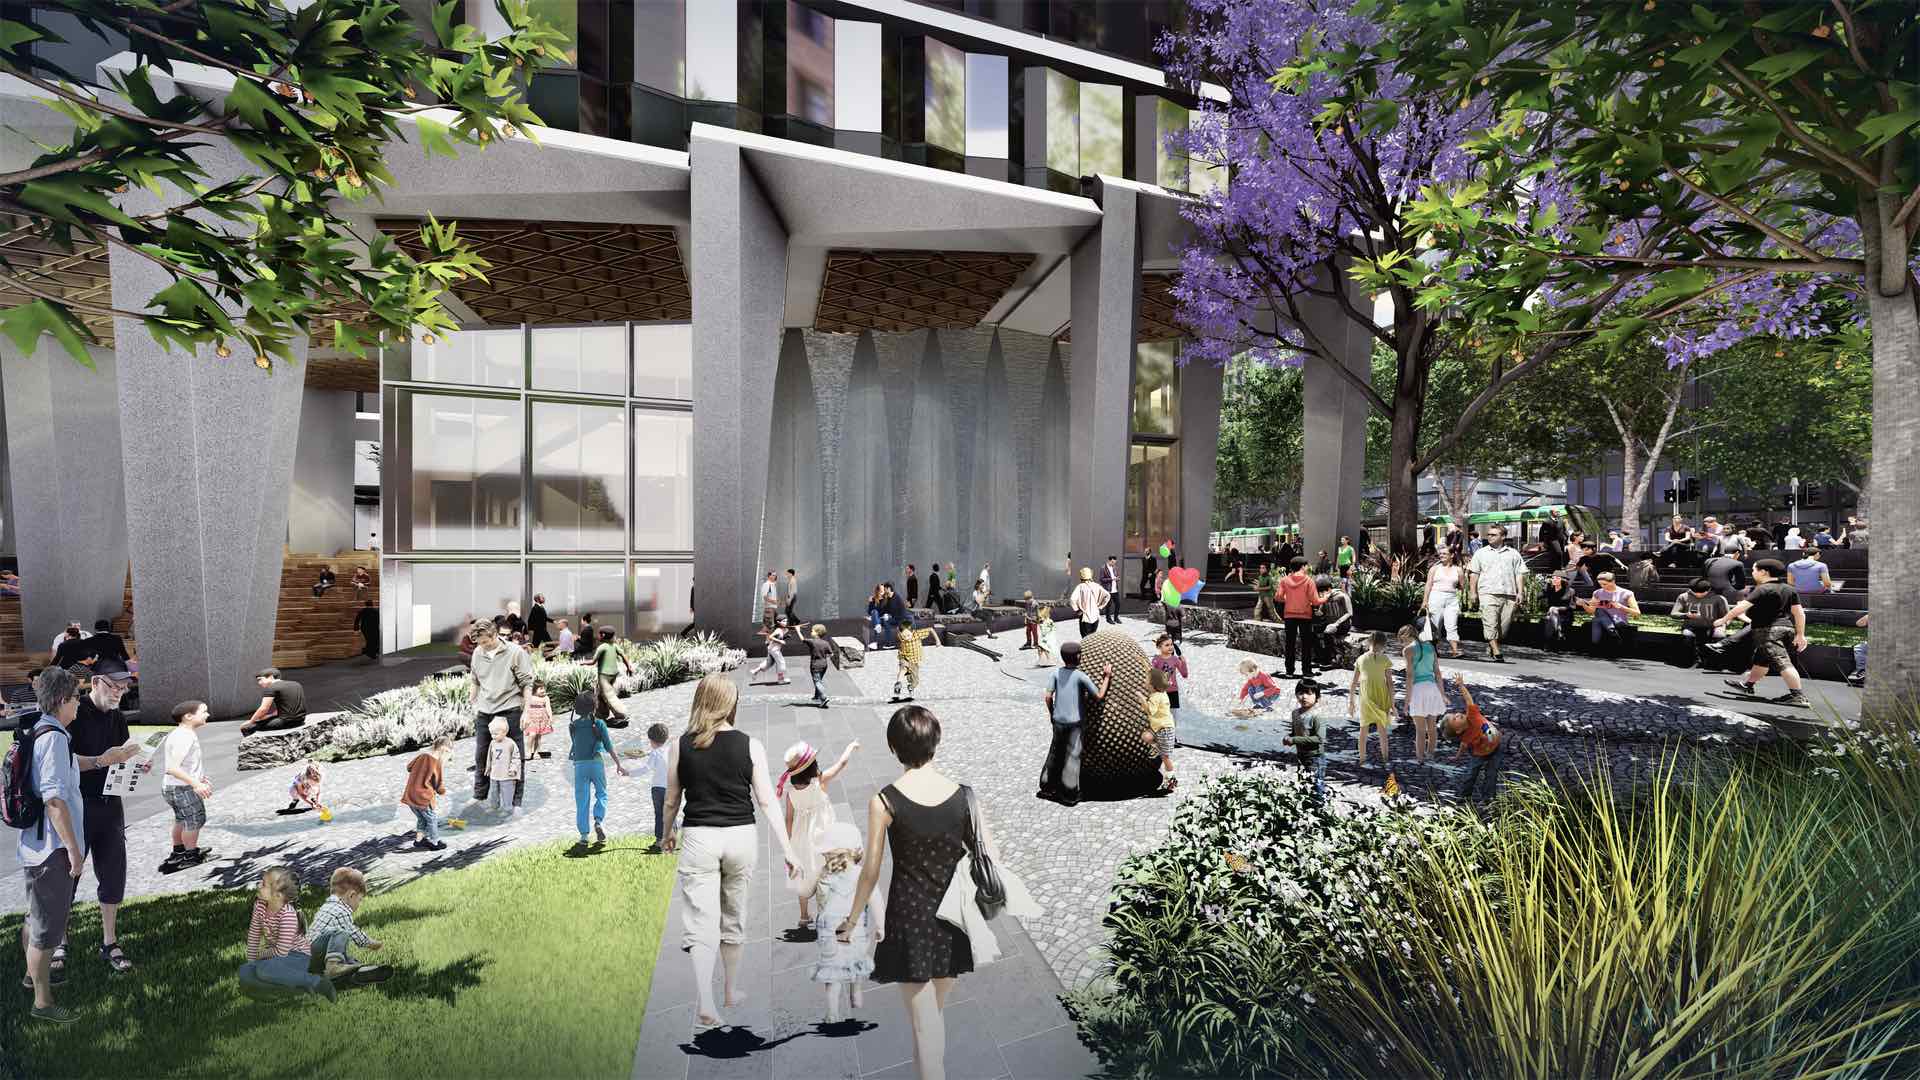 Melbourne's CBD Is Getting a New Public Park, but Not Everyone Is Happy With It